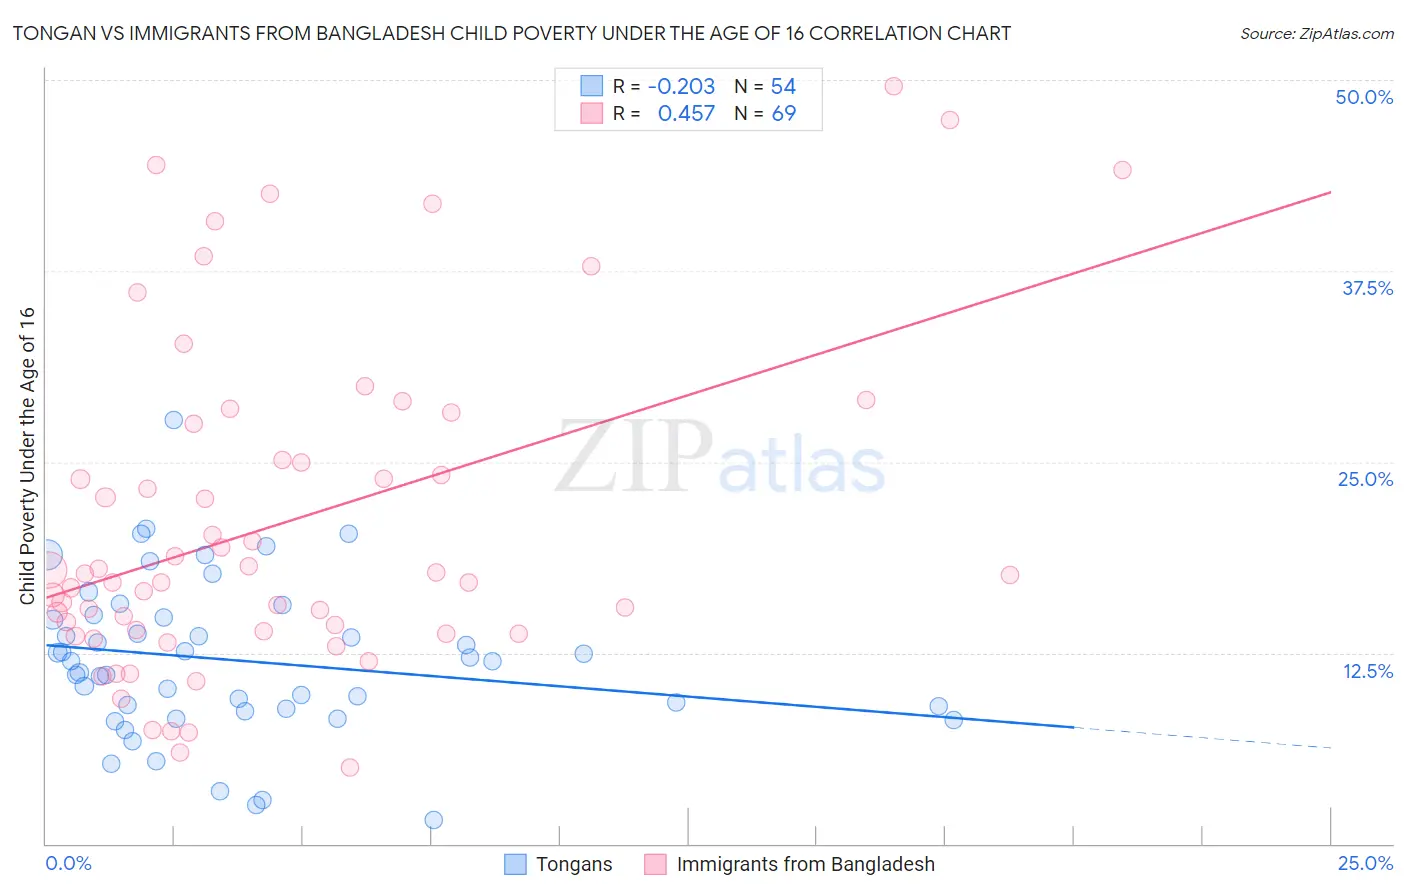 Tongan vs Immigrants from Bangladesh Child Poverty Under the Age of 16